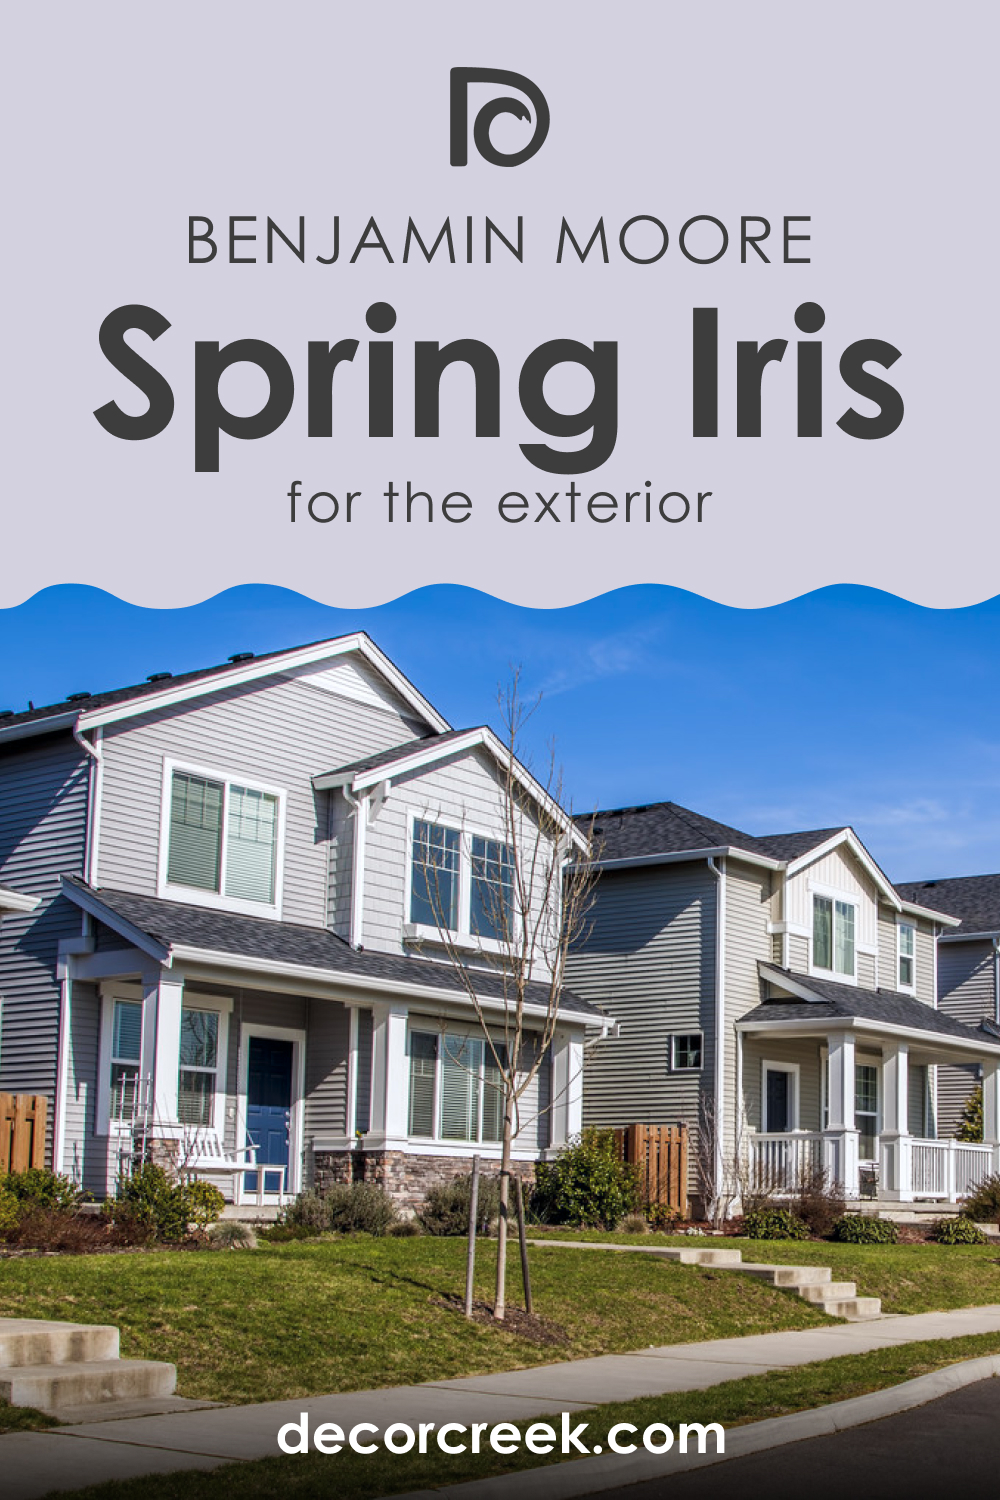 How to Use Spring Iris 1402 for an Exterior?